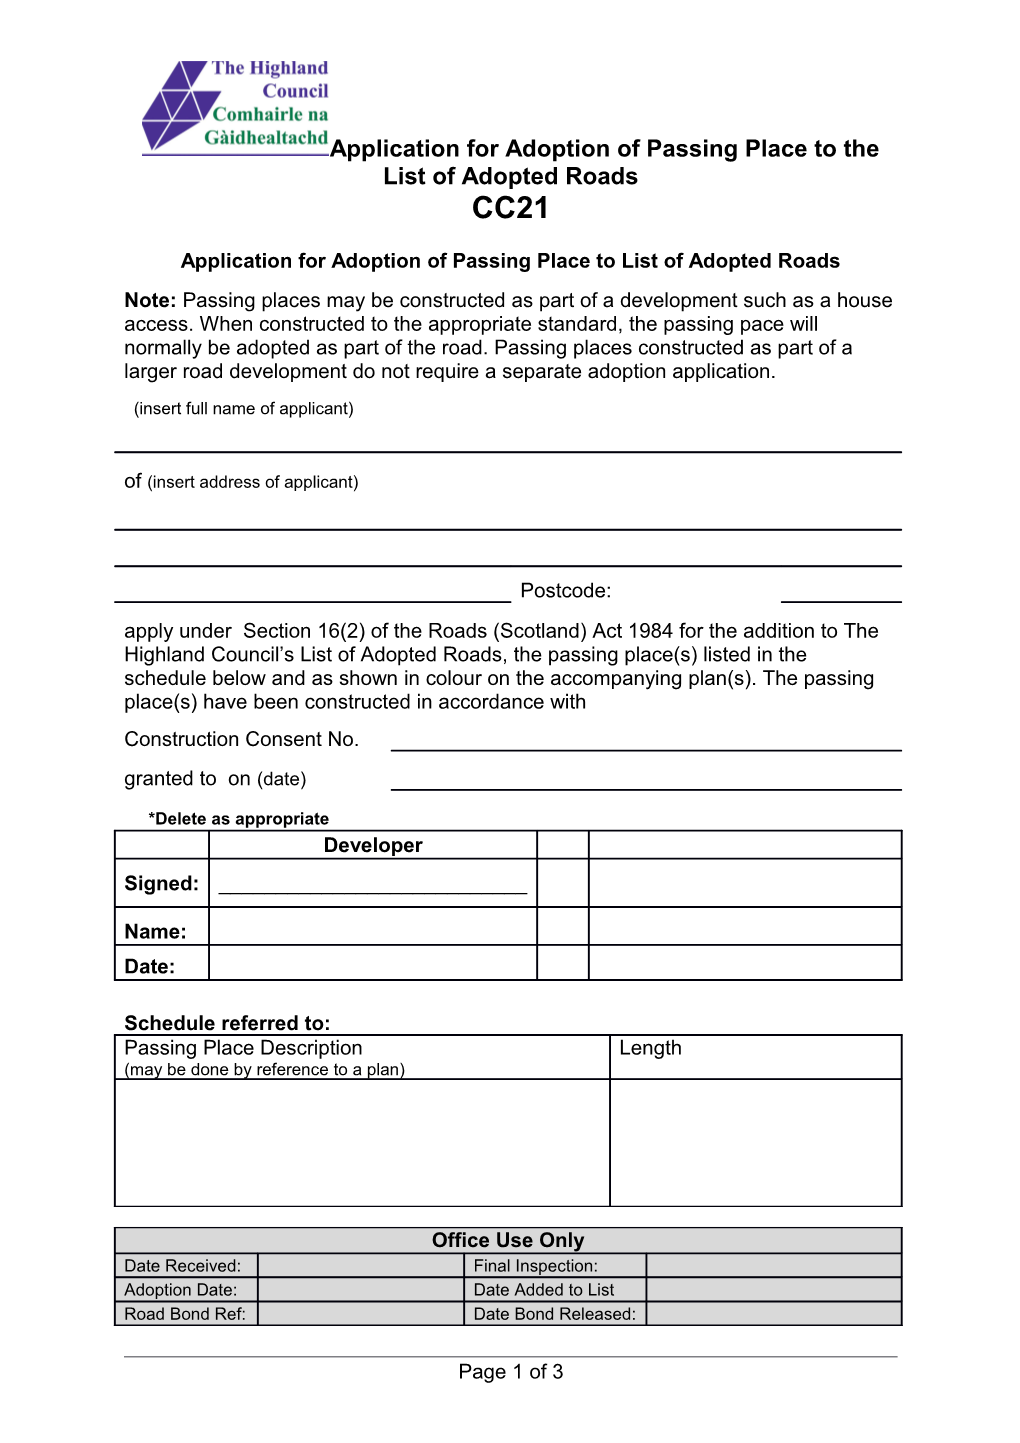 Application for Adoption of Passing Place to List of Adopted Roads